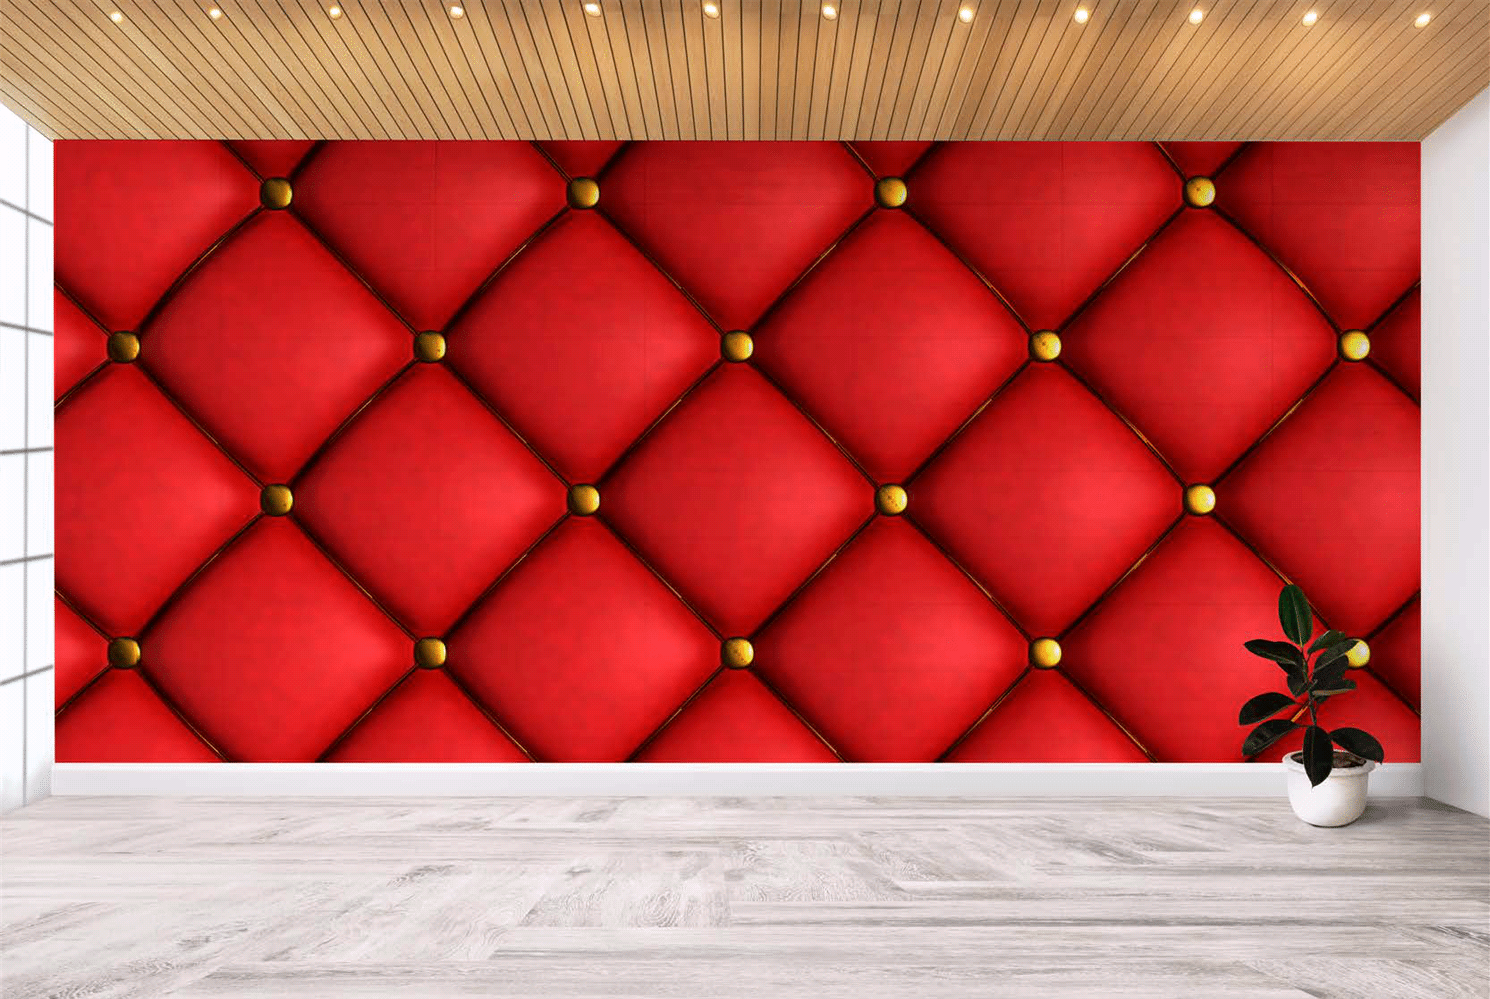 Red Quilt Wall-Paper